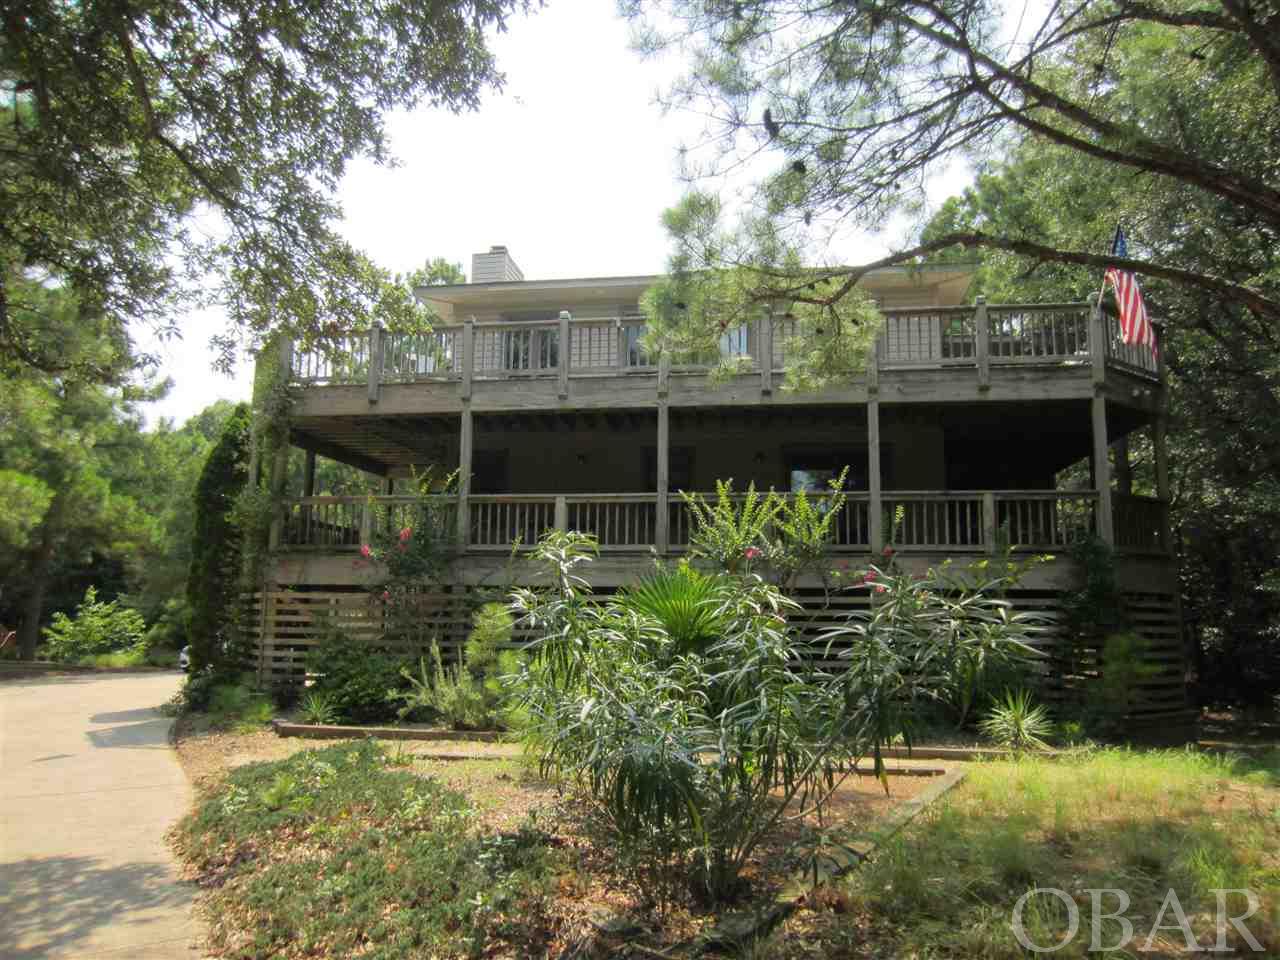 Gorgeous high elevation 4 bedroom, 3.5 bath home on the dunes of Southern Shores. Tucked back in the Live Oaks from the road. Very private. A huge number of decks!!! Two levels of extra wide decks go almost completely around the home. Sought after X Zone, so no Floor Insurance required. Open spacious living area with cathedral ceiling and an extra wide Andersen Slider out to the huge decks and an attractive, wood burning fireplace which owner says puts out a lot of heat. Beautiful, conveniently laid out kitchen with striking high-end Cherry cabinetry and granite counter tops. The Sky Light brings the sunlight in. Off of the kitchen is a super inviting 10 X 16 Florida Room. The windows are the kind that come almost down to the floor so they make you feel like the outside has come into the room. There is a pass-through from the kitchen with its own little pocket door. This heated and cooled room is fantastic. Attractive tiled powder room with sky light. There is a master bedroom on the southwest corner of this floor with its own door out to the decks. Elegant master bath with a stand-up shower and separate standard sized tub. The tile work in here is lovely. This bath also has a sky light. The middle floor has two bedrooms that share a lovely, renovated hall bath. Note the built-in window seats open for storage. There is another master bedroom with a gorgeous, tiled bath, slider out to the decks and walk-in closet.  The washer and dryer are located conveniently in the hallway. Also, there is an office on the northeast corner. One of the many great features of this home is the convenient DRY ENTRY underneath from the spacious under house parking. Enter the home without getting out in the weather. There is a huge area underneath fully paved, expansion would be easy. LOTS OF POSSIBILITIES for this wonderful area. There is also a large storage/workshop area that has a HVAC vent for cooling and heating, not counted in Heated Living Area. Outside shower. Whole house intercom, central VAC. Roof replaced 2004. Orkin does an annual inspection. Hoy HVAC services the heat pumps twice a year. Septic was just pumped August 2019. Long winding driveway with a huge parking pad for plenty of parking. Just a quick walk to the Hillcrest Traffic light and the Hillcrest Beach Access. Look in Associated Docs for MOG/RPD, Expenses, As Built Survey and Permits. For a low $65 per year the Southern Shores Civic Association lets you take advantage of three sound side marinas with picnic and crabbing areas, Private Sound Beach, thirty-four Private Ocean Beach accesses, parks, basketball and soccer fields. For an additional fee you can join the SSCA tennis courts and/or Boat Club.  Owner occupied, EZ to Show! Combo Lockbox. Some furniture items may convey.